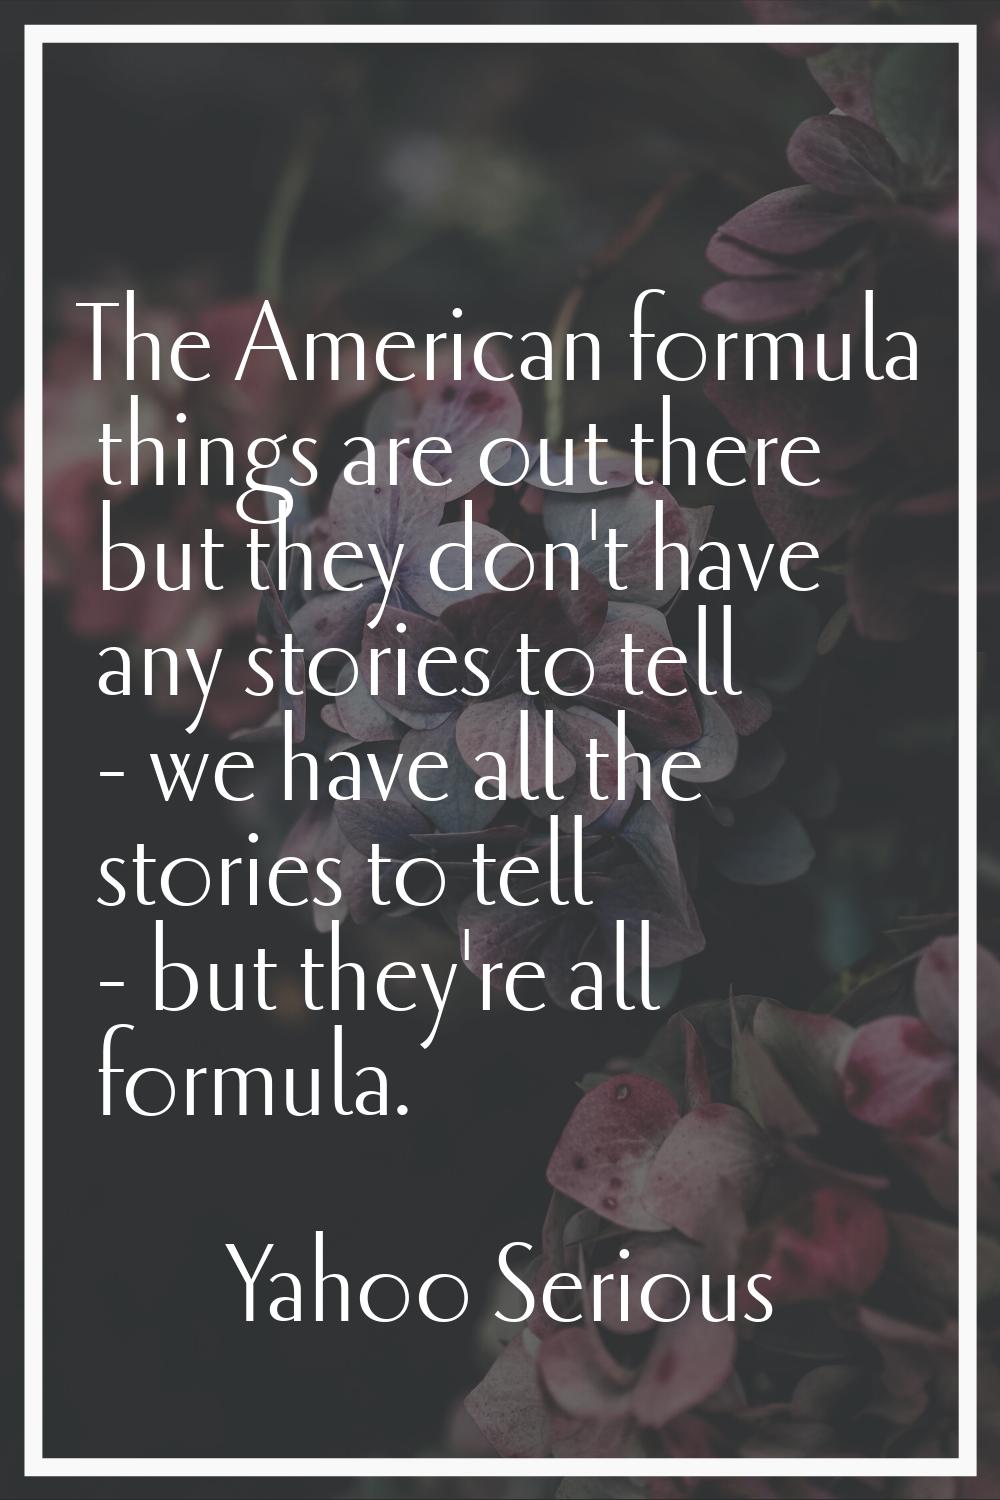 The American formula things are out there but they don't have any stories to tell - we have all the